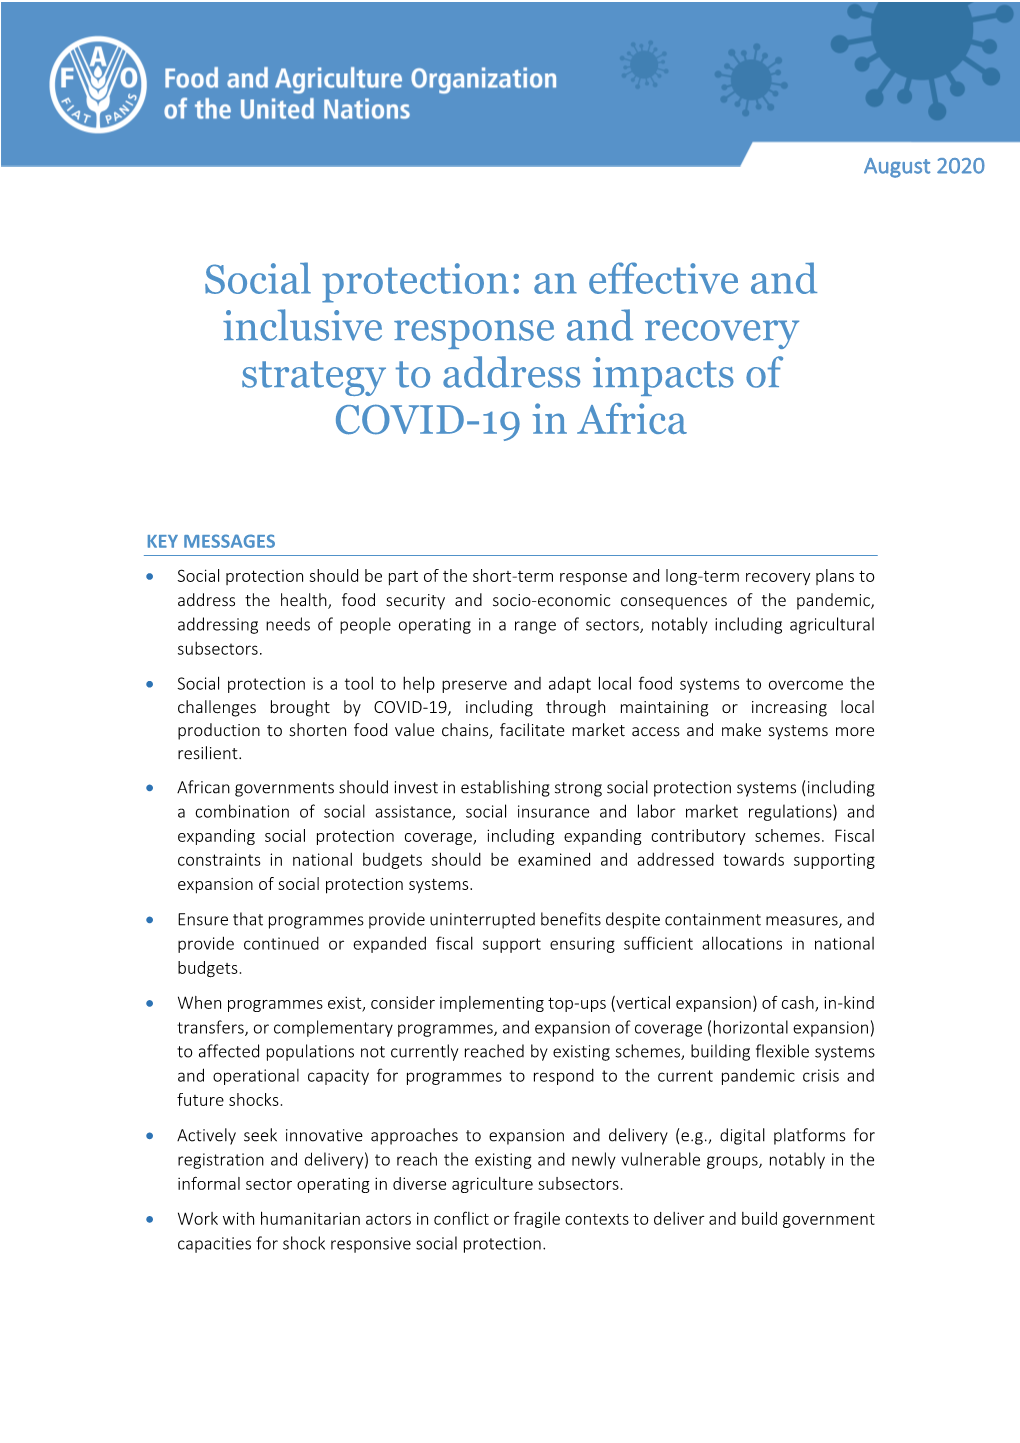 Social Protection: an Effective and Inclusive Response and Recovery Strategy to Address Impacts of COVID-19 in Africa